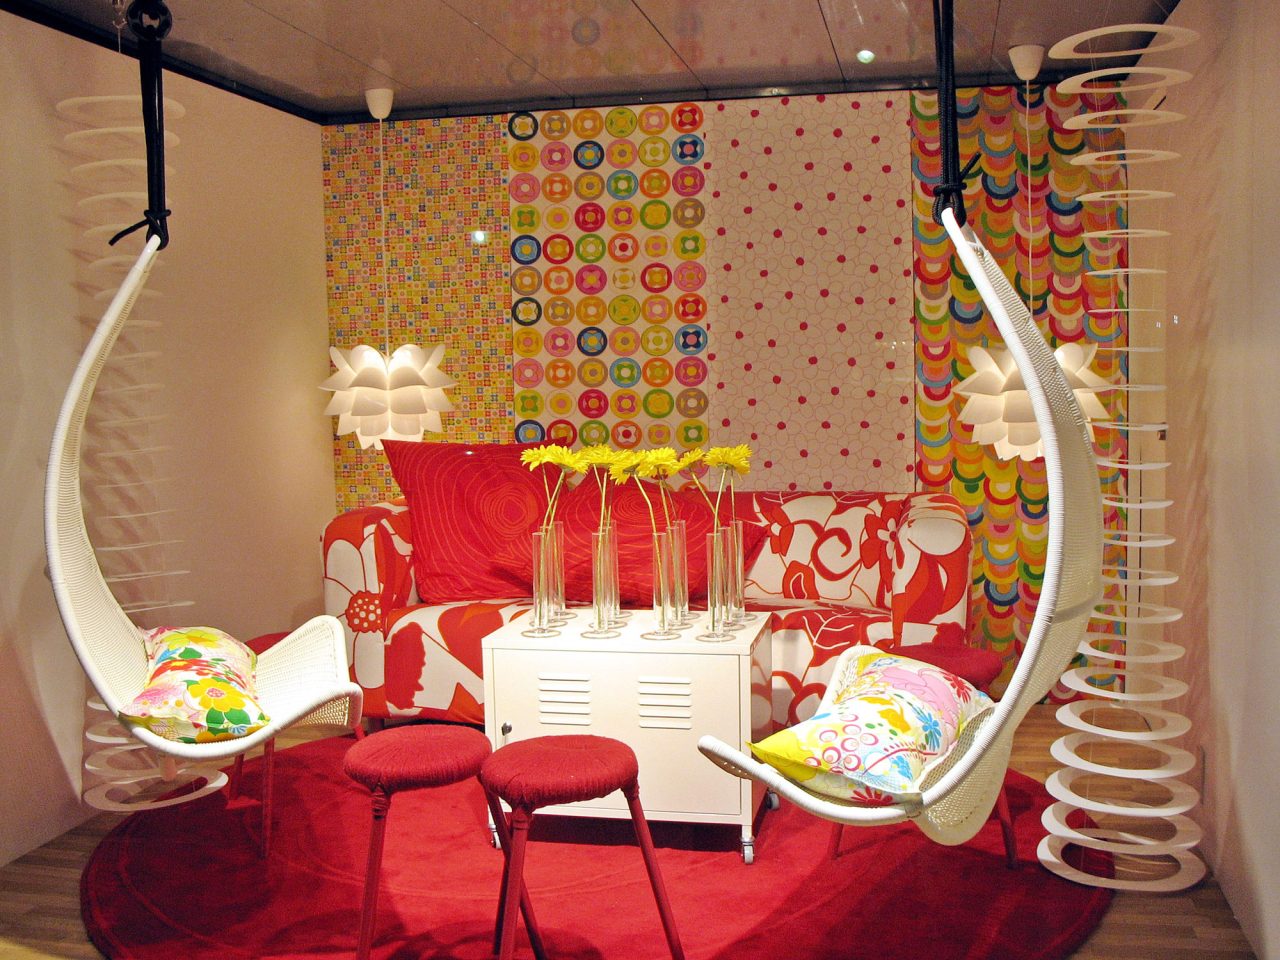 Room interior in bright colours built up in a small space, a small red sofa and two white hanging chairs.